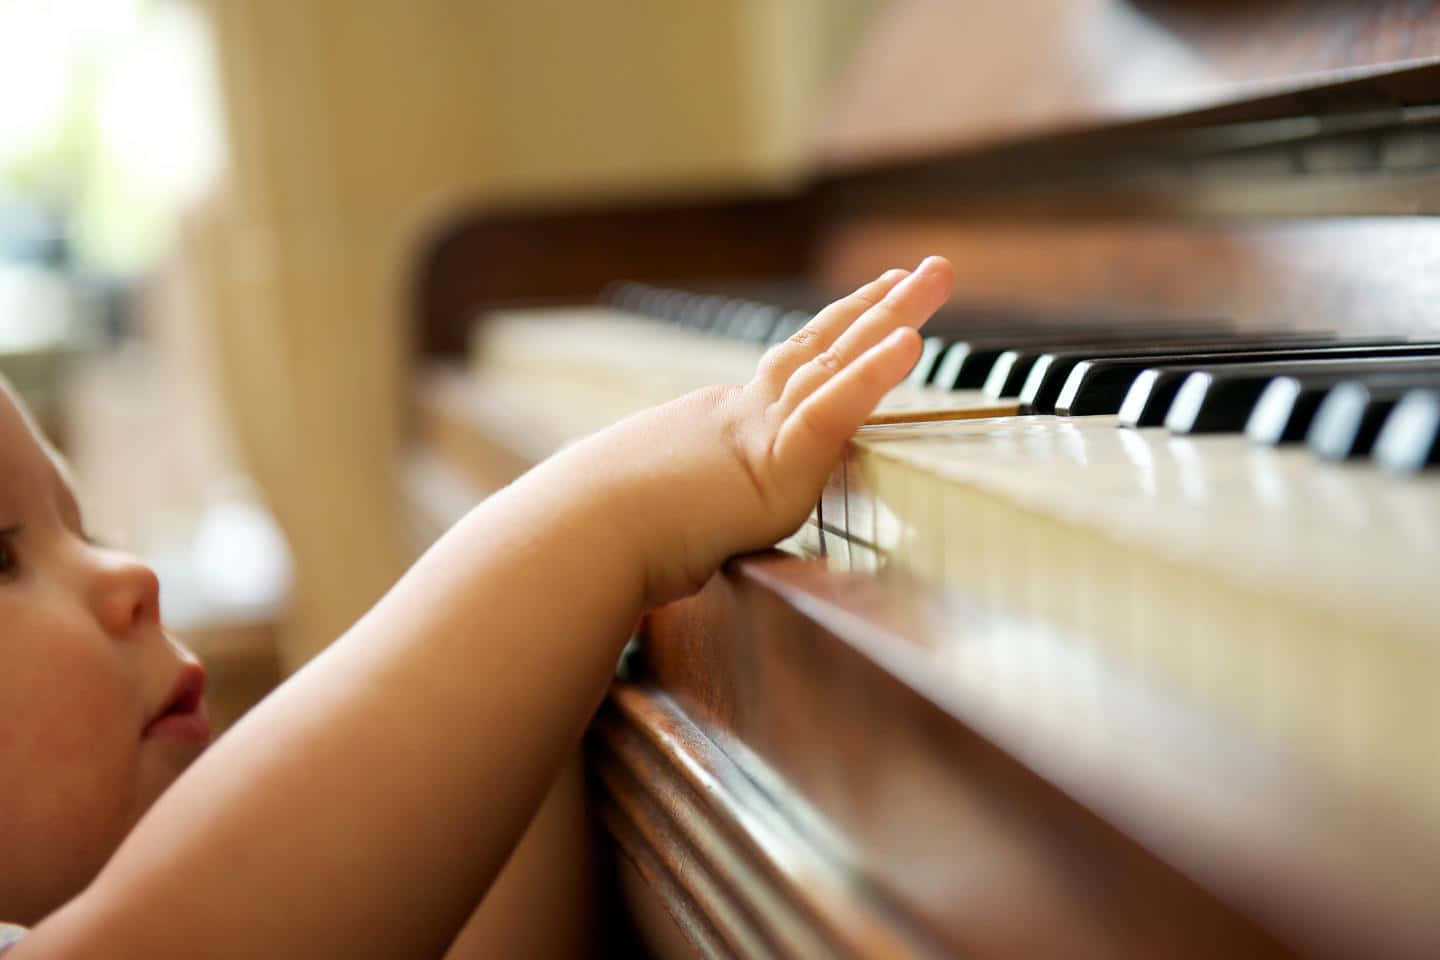 A Baby Is Playing The Piano With His Hand